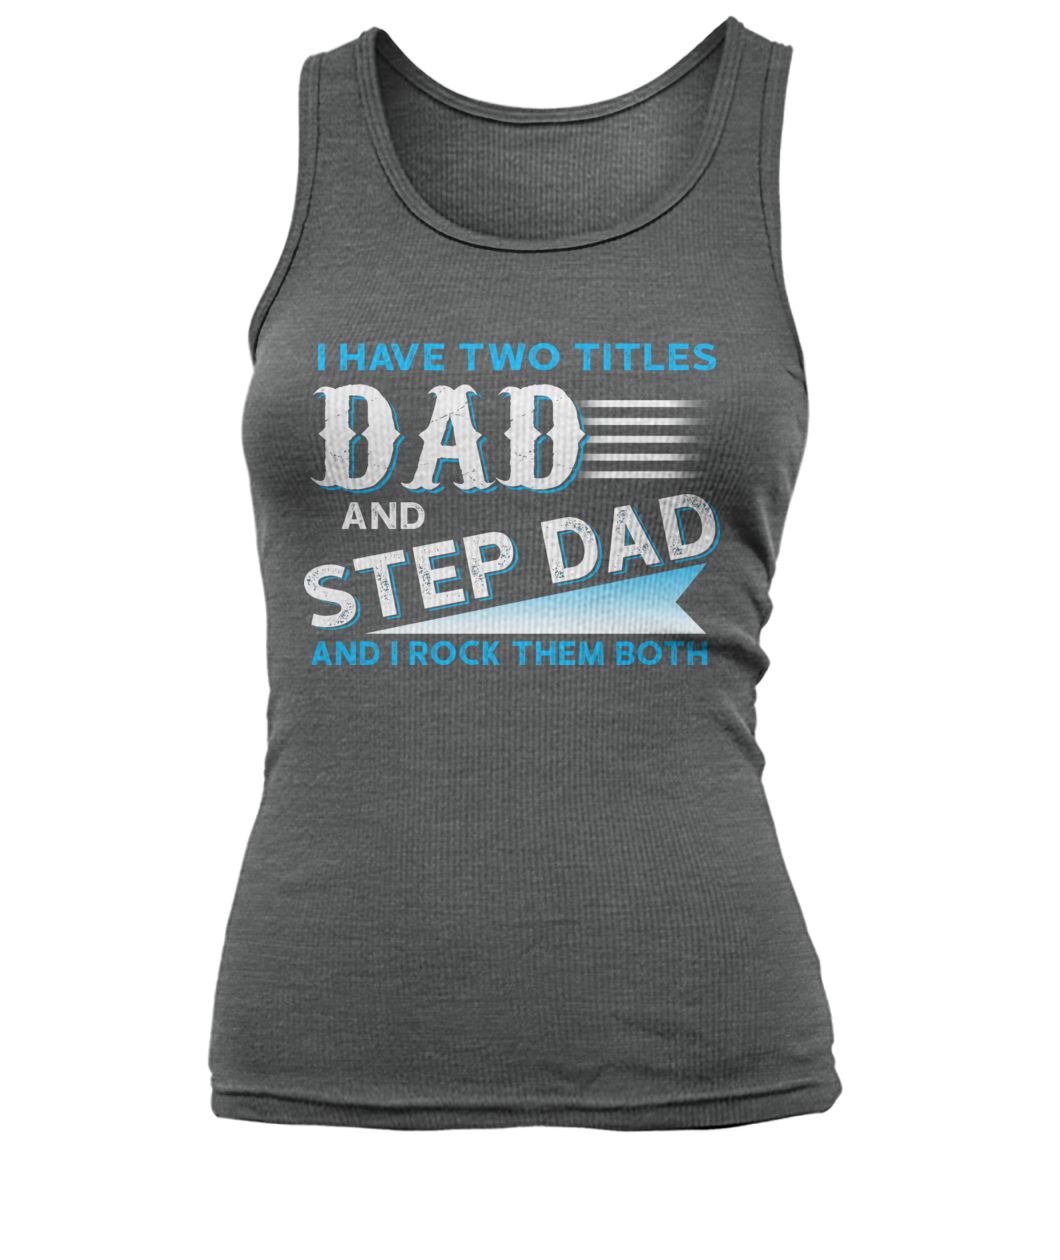 I have two titles dad and stepdad and I rock them both father's day women's tank top